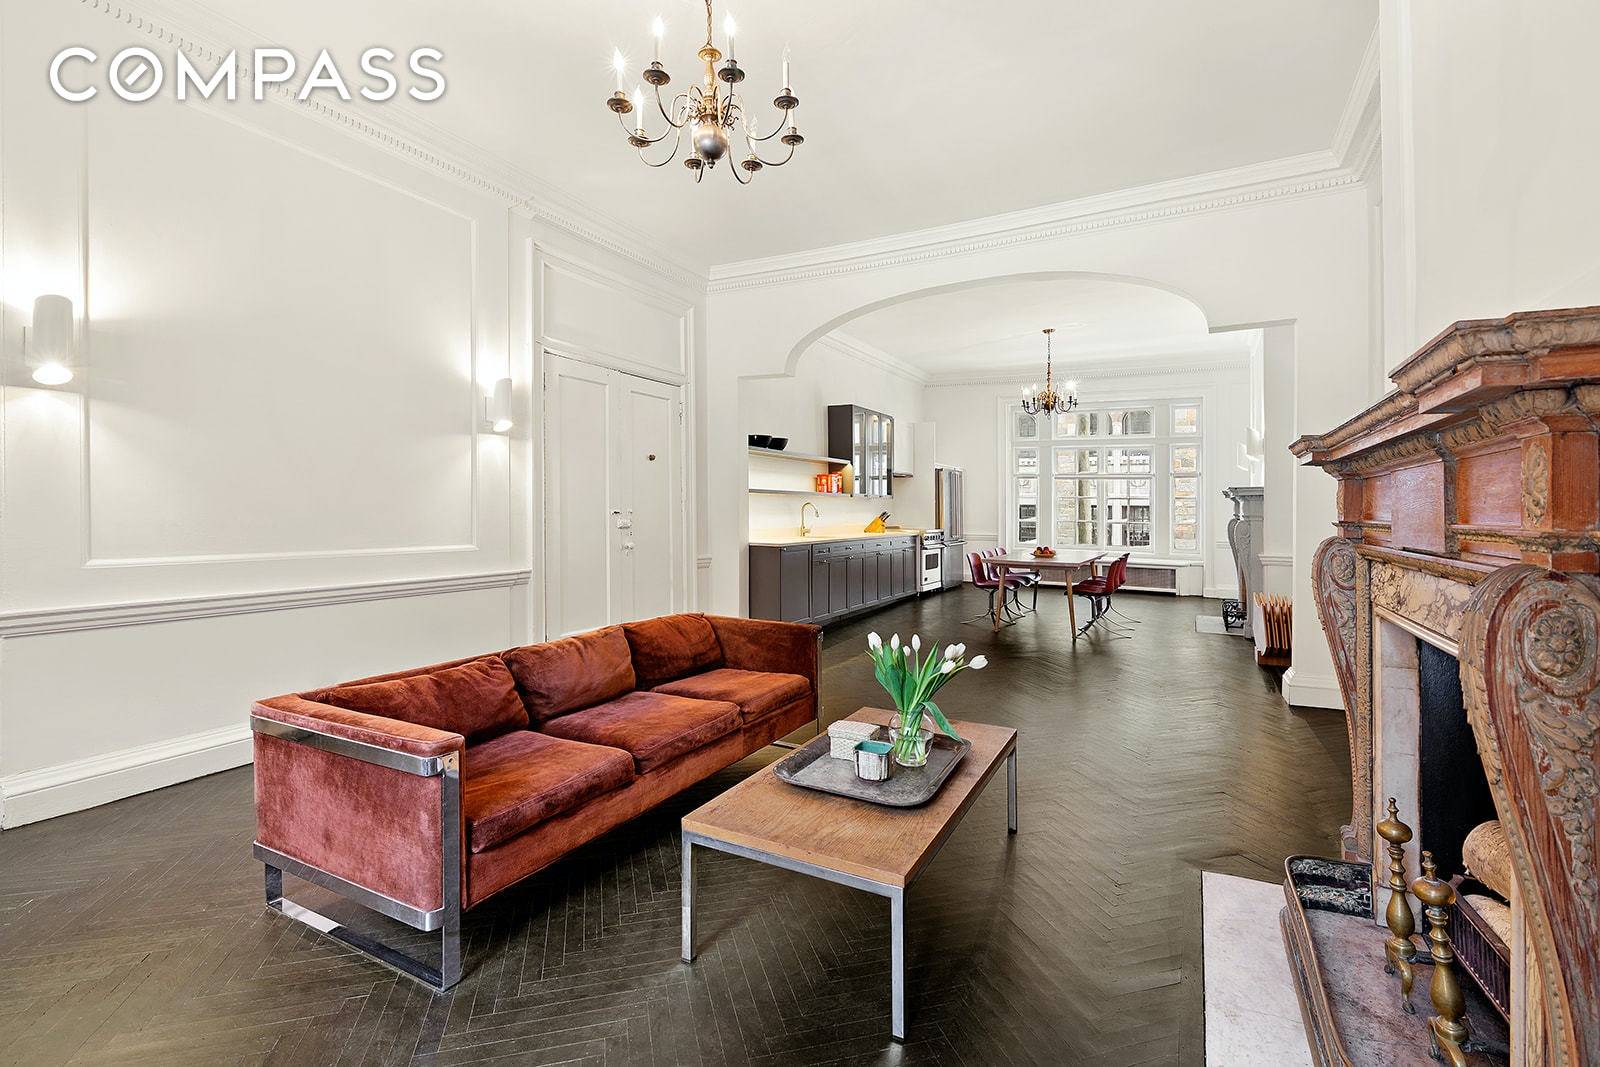 This is a very special duplex townhouse apartment in prime Brooklyn Heights.